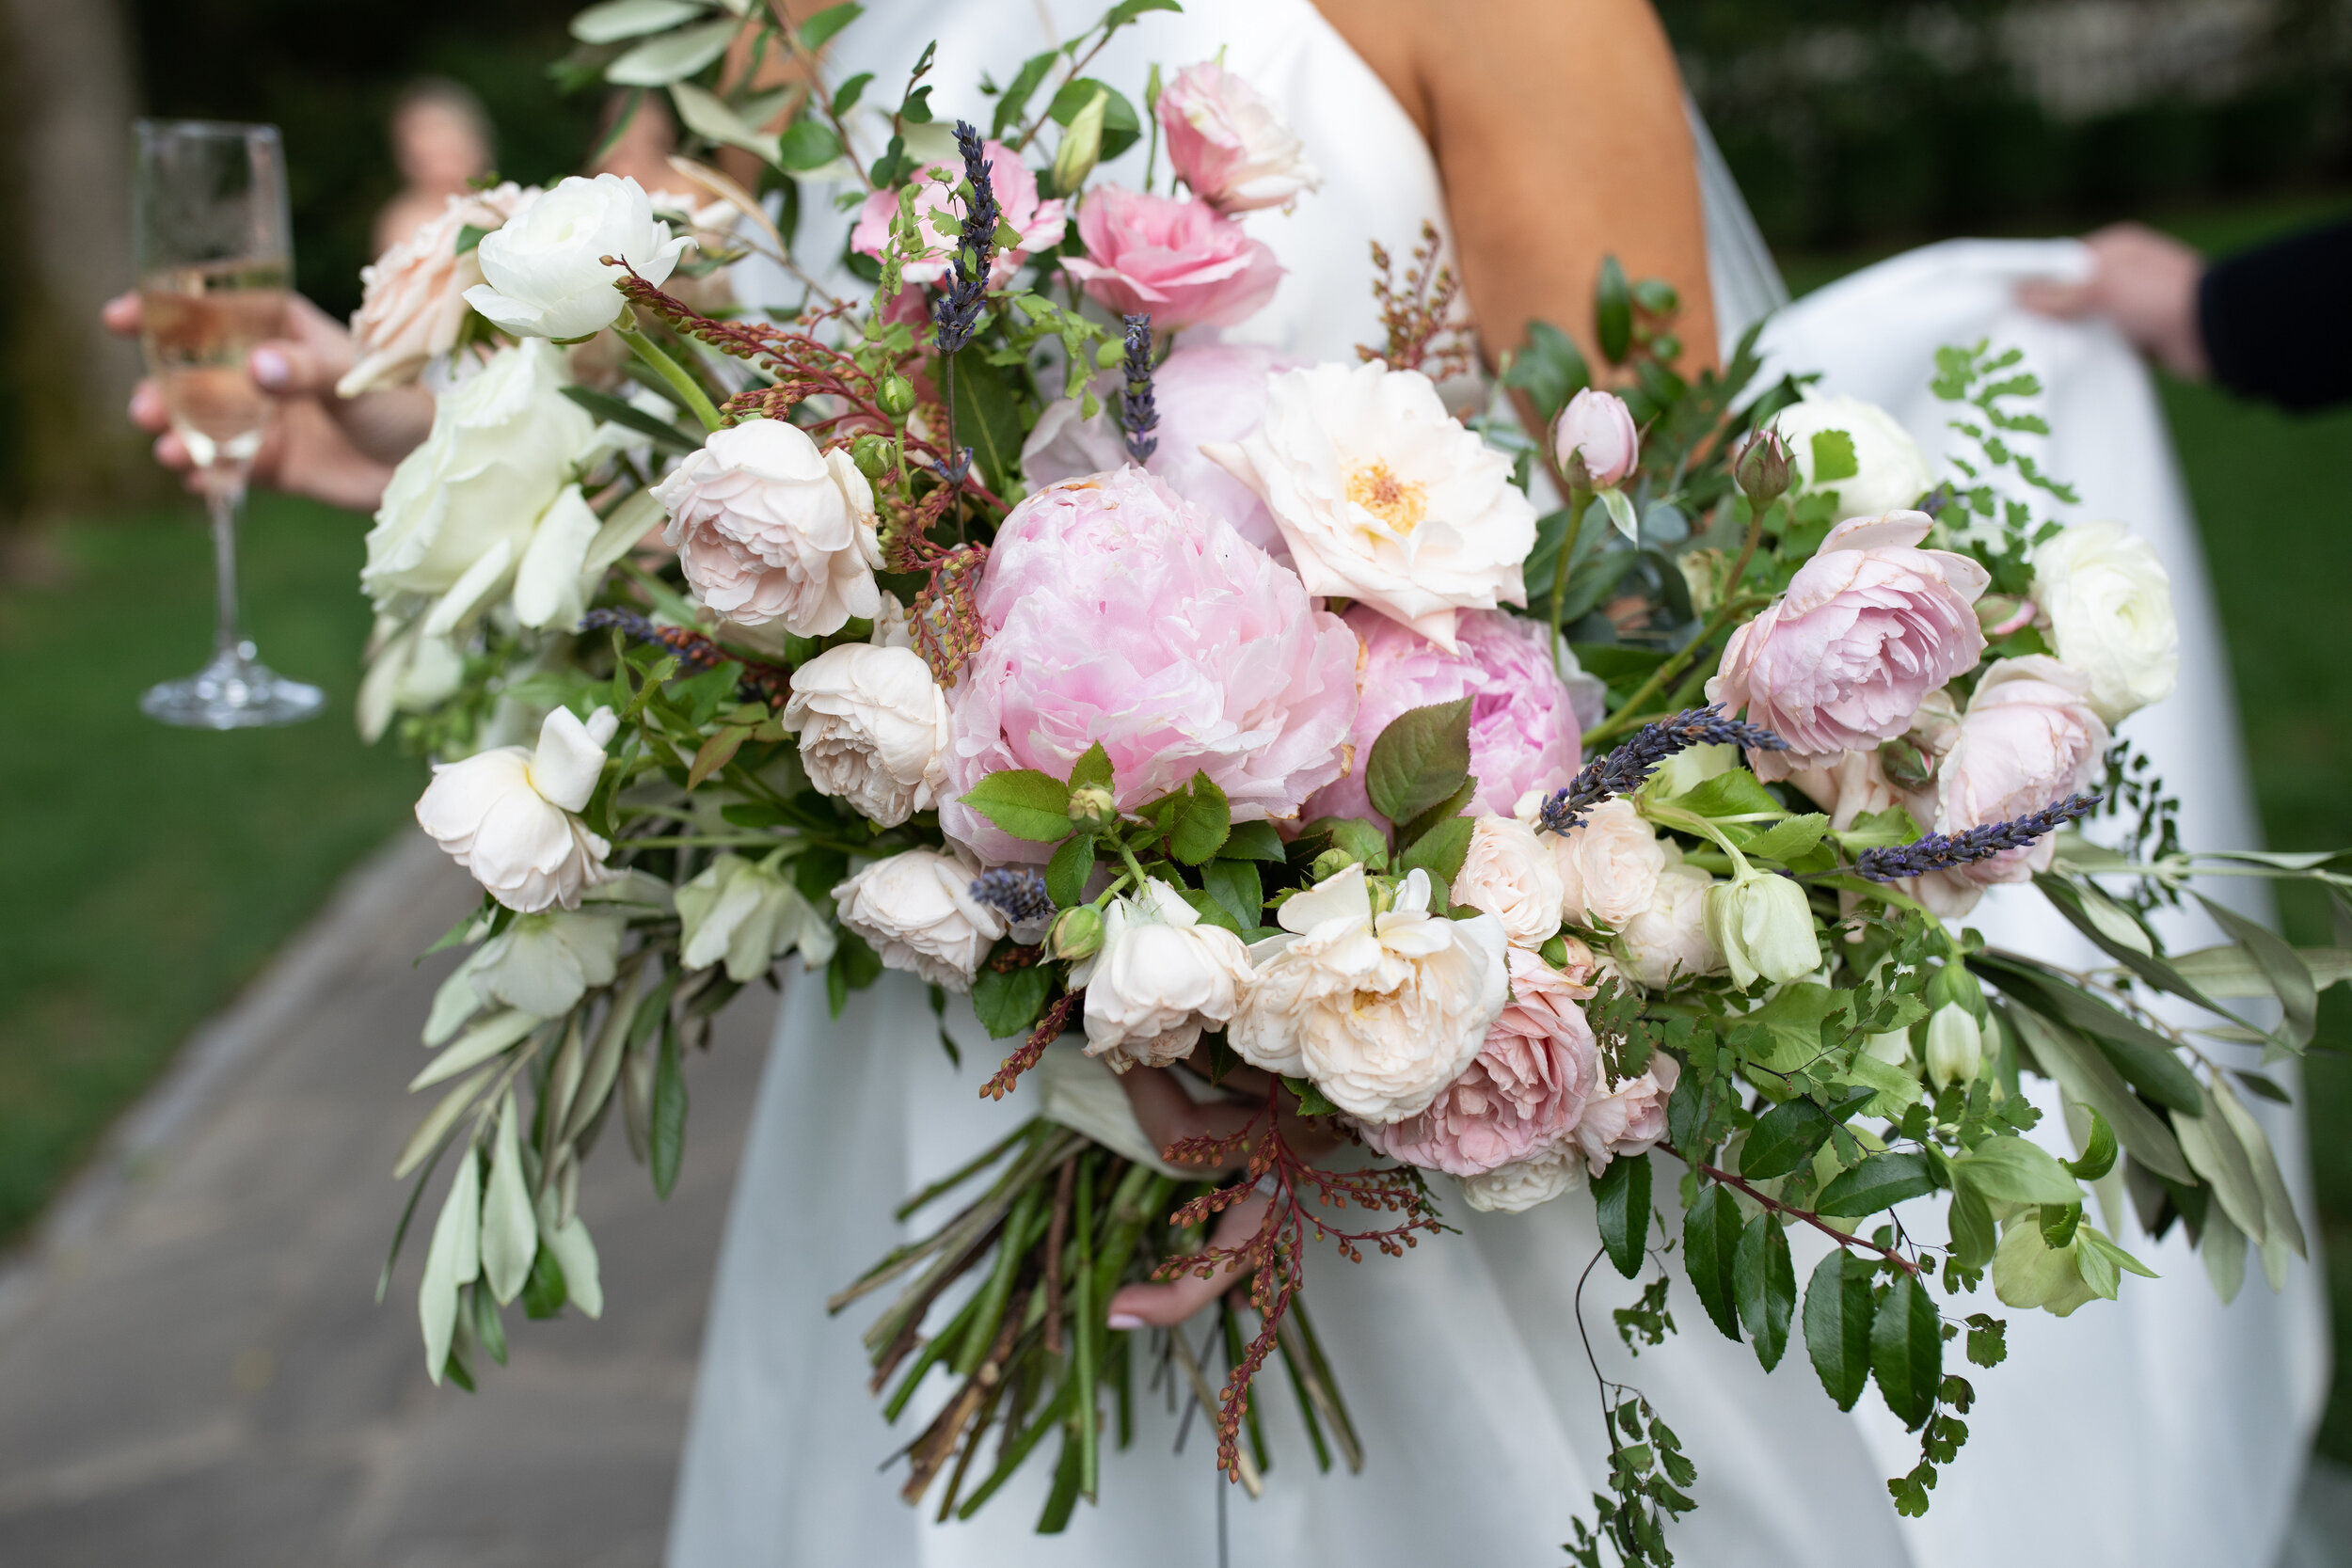 Loose, untamed bridal bouquet with soft pink peonies, white garden roses, ranunculus, olive branches, ferns, and greenery. Nashville wedding and event floral design at Belle Meade Plantation.